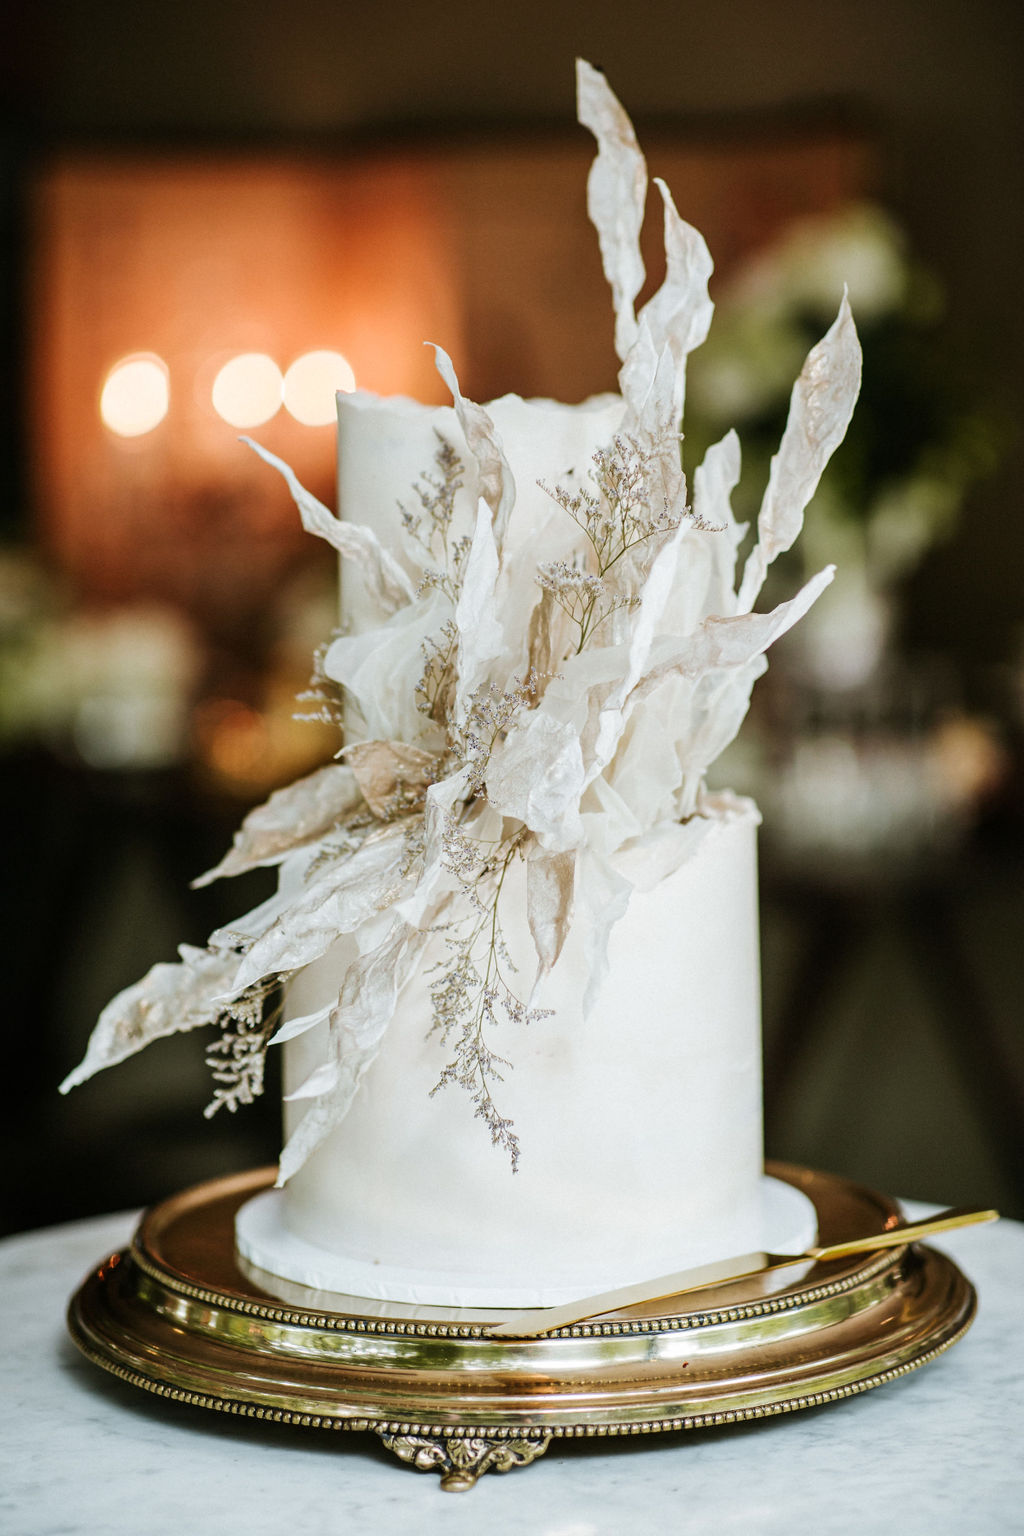 Exotic wedding cake for KWH bride Win's tropical wedding.